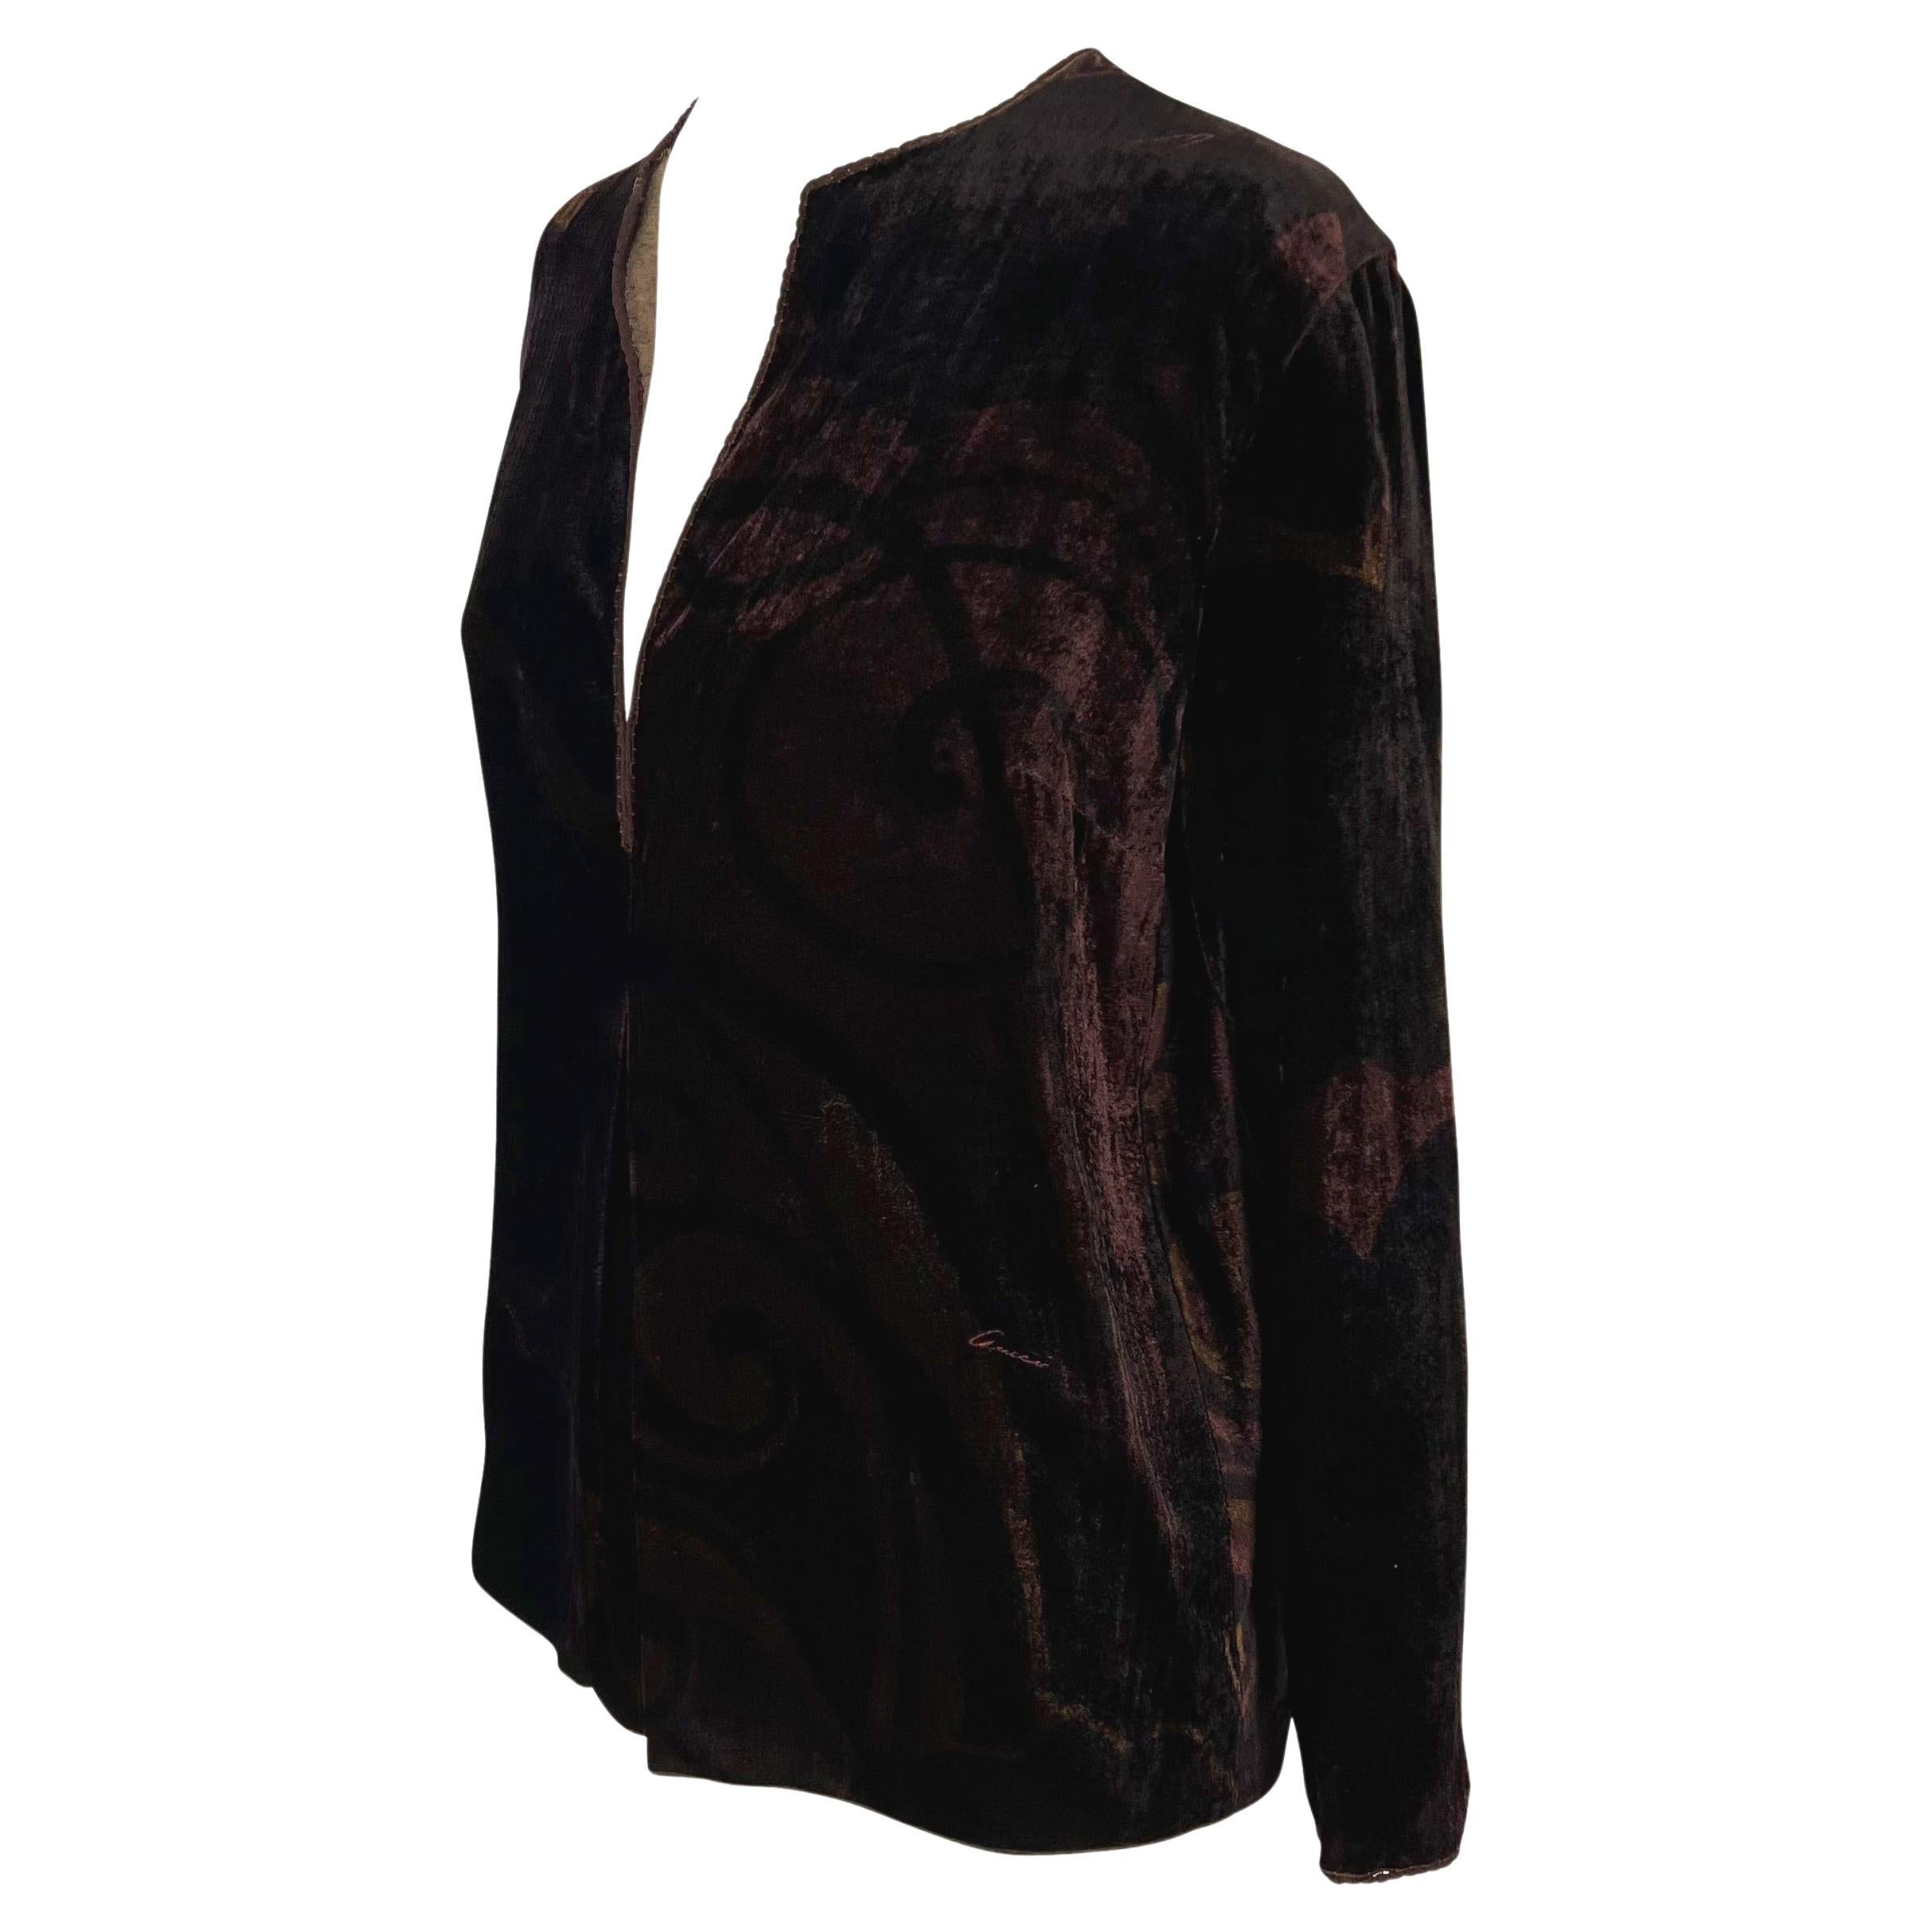 Presenting a luxurious brown velvet Gucci tunic top, designed by Tom Ford. From the Fall/Winter 2001 collection, this loose-fitting top features a plunging v-neckline, a small pleat below the neckline, and an abstract print with 'Gucci' written in